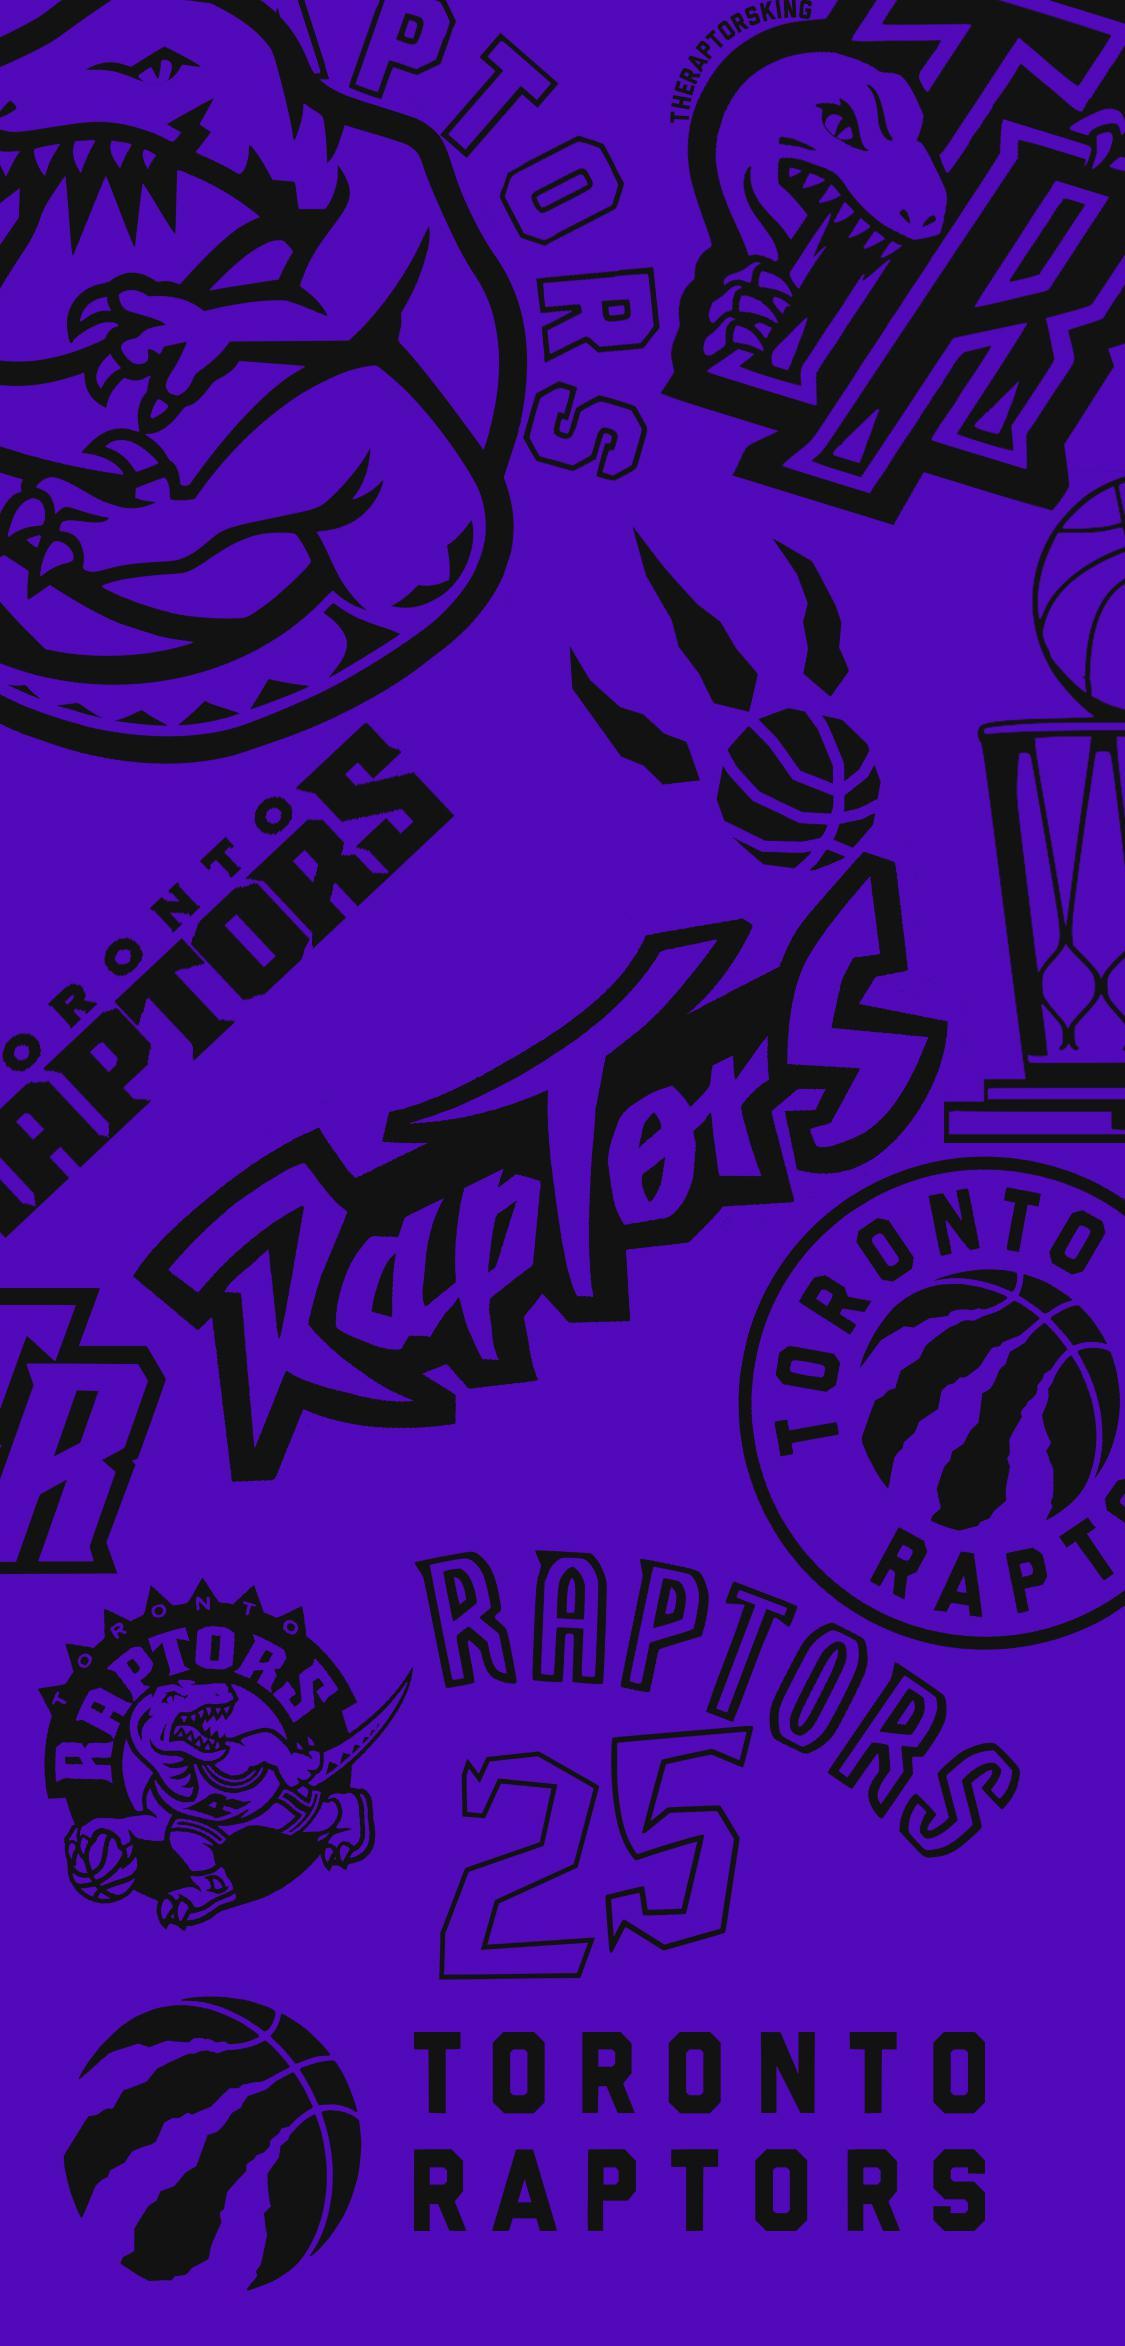 Raptors iPhone Wallpaper I made for their 25th anniversary #TwoFive #WeTheNorth